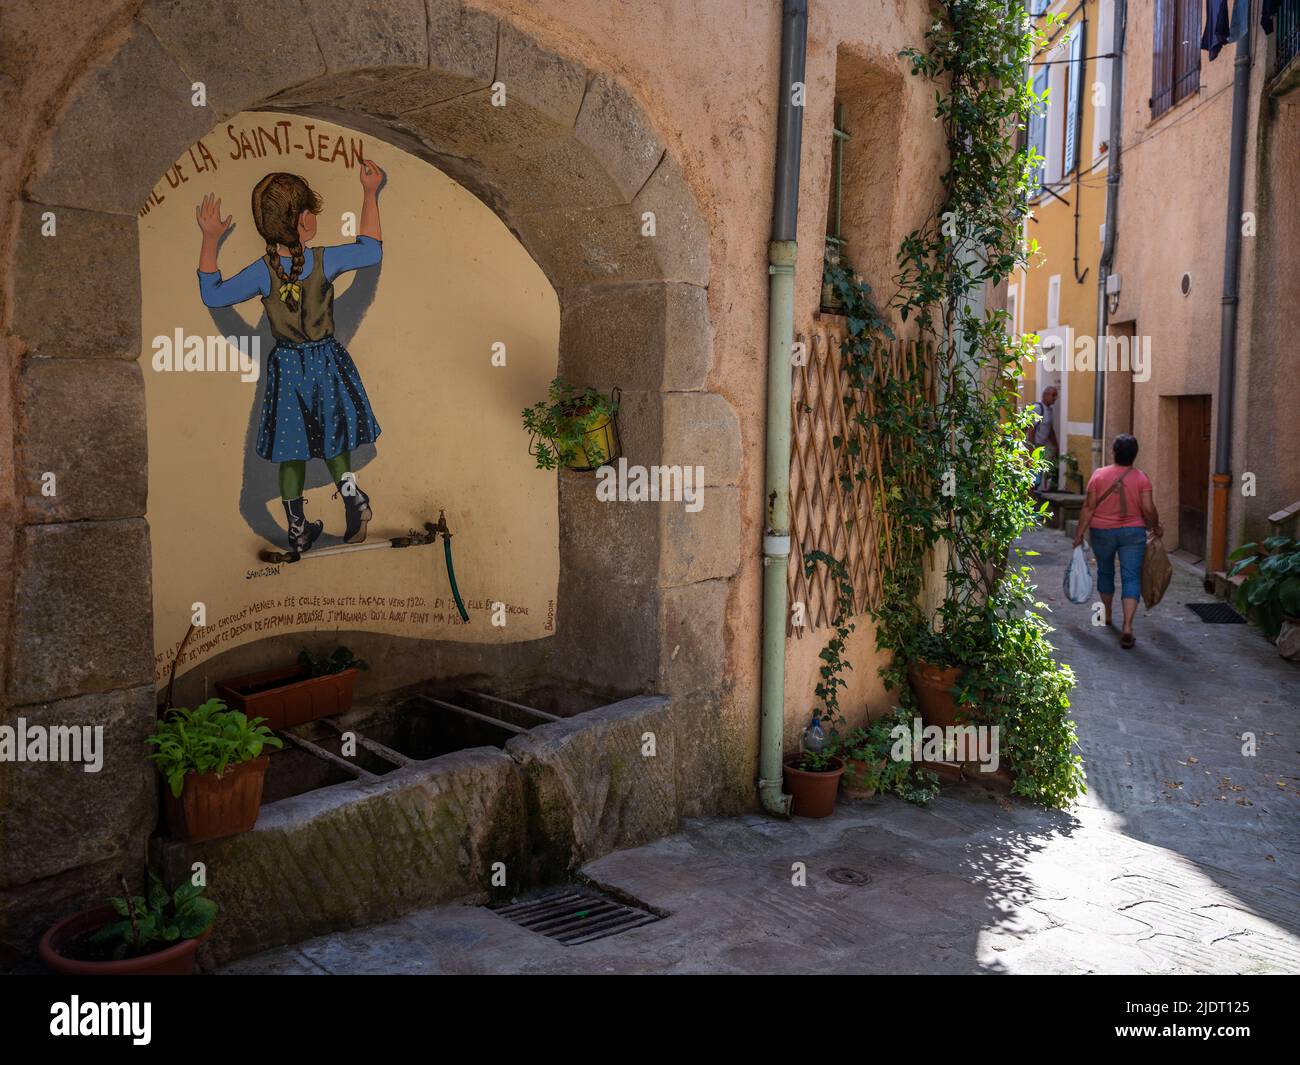 The village fountain for fresh water in the Alpine village of Villars-sur-Var in the Alpes-Martimes region of southeastern France. Stock Photo